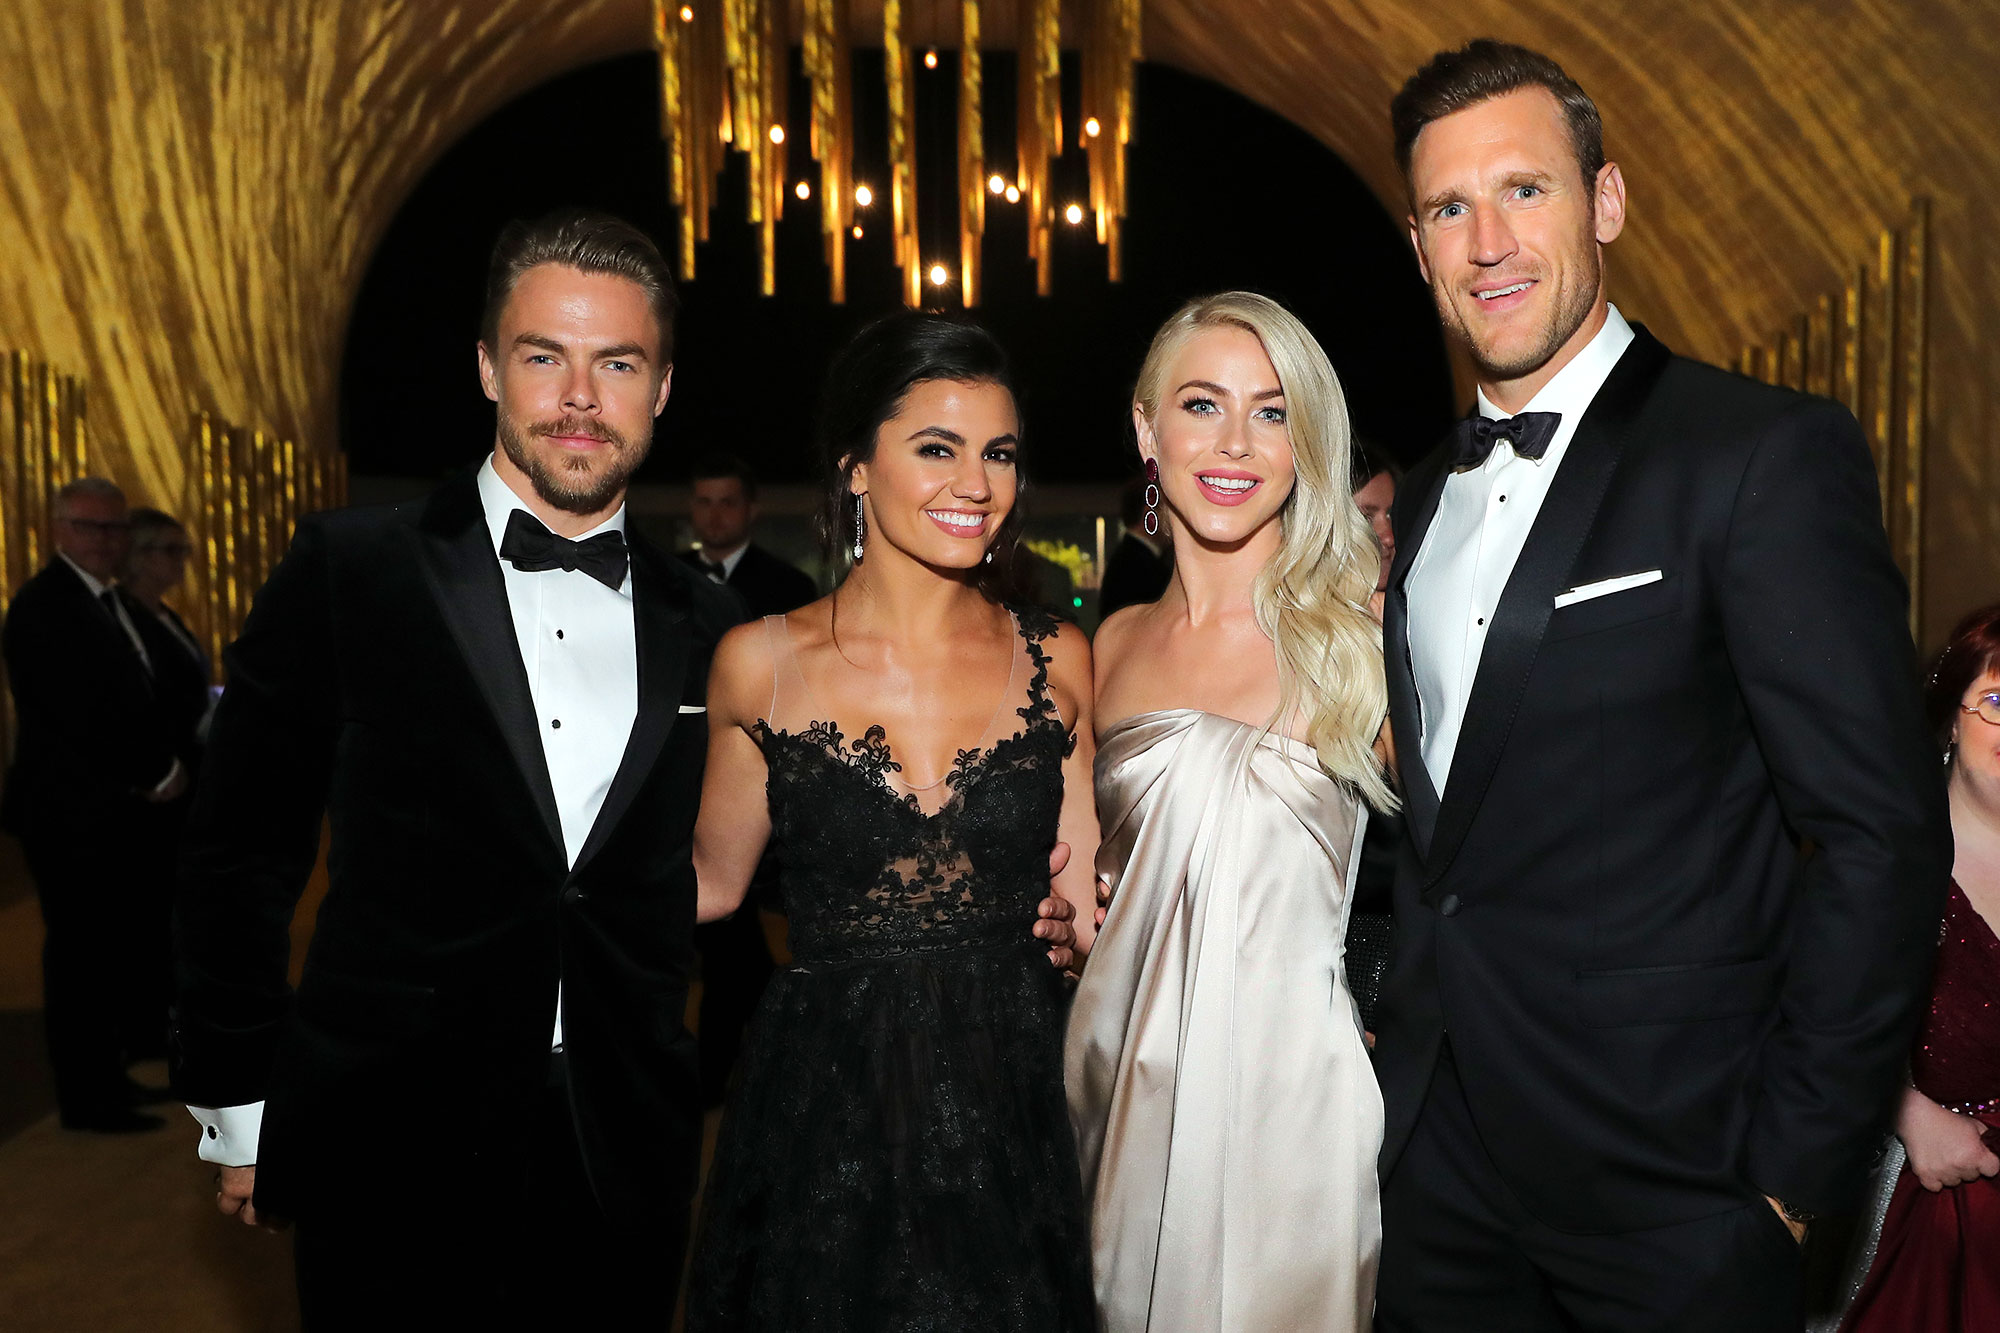 Julianne Hough's Wedding Photos - See the Romantic Pics!: Photo 3925668, Brooks  Laich, Julianne Hough, Wedding Pictures Photos